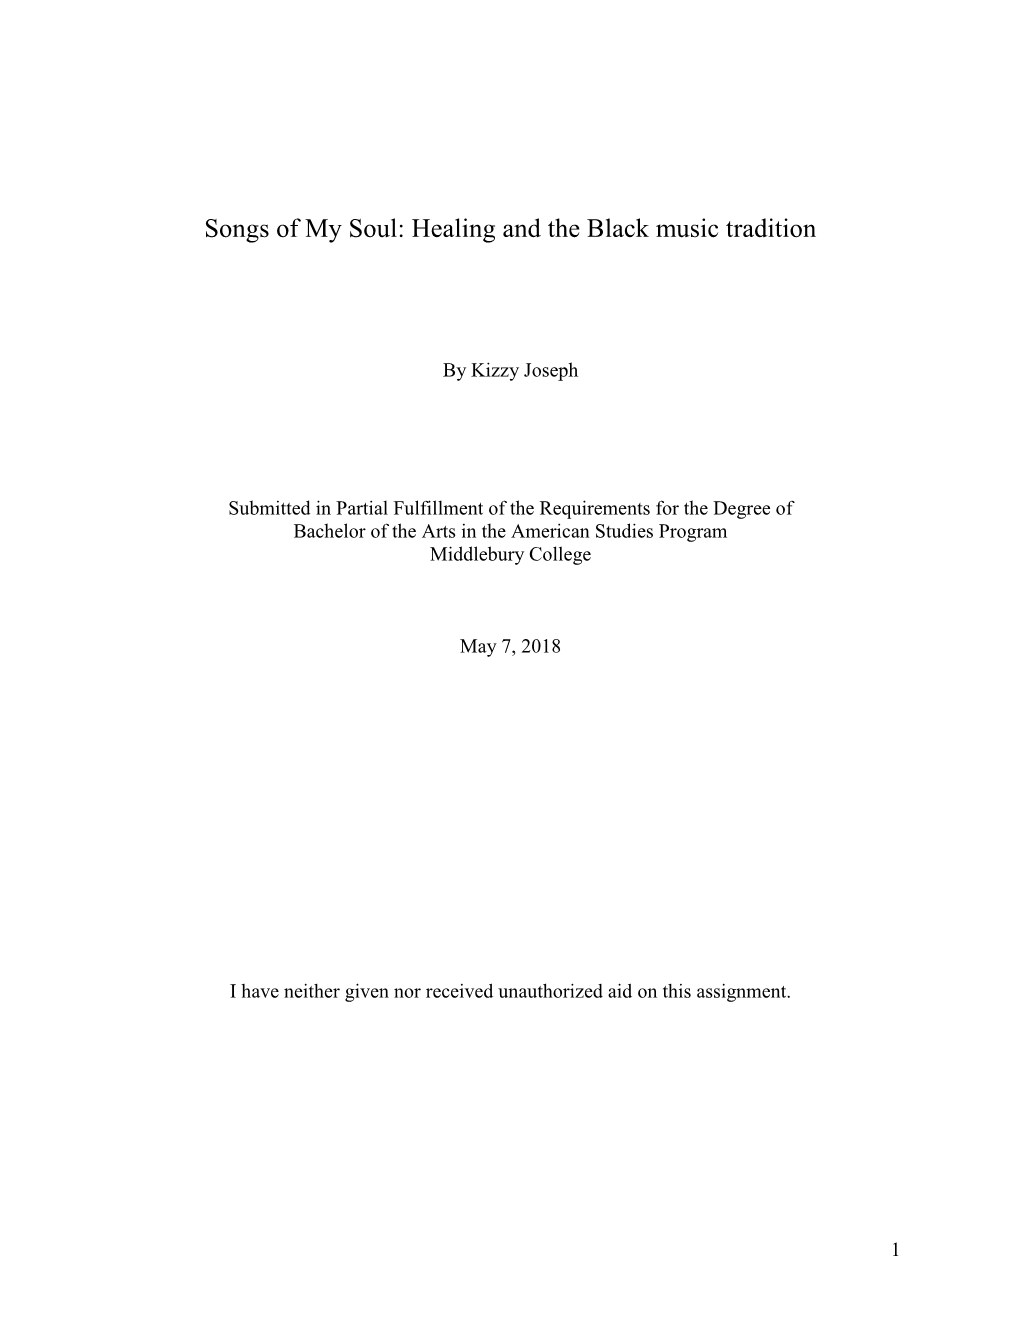 Songs of My Soul: Healing and the Black Music Tradition